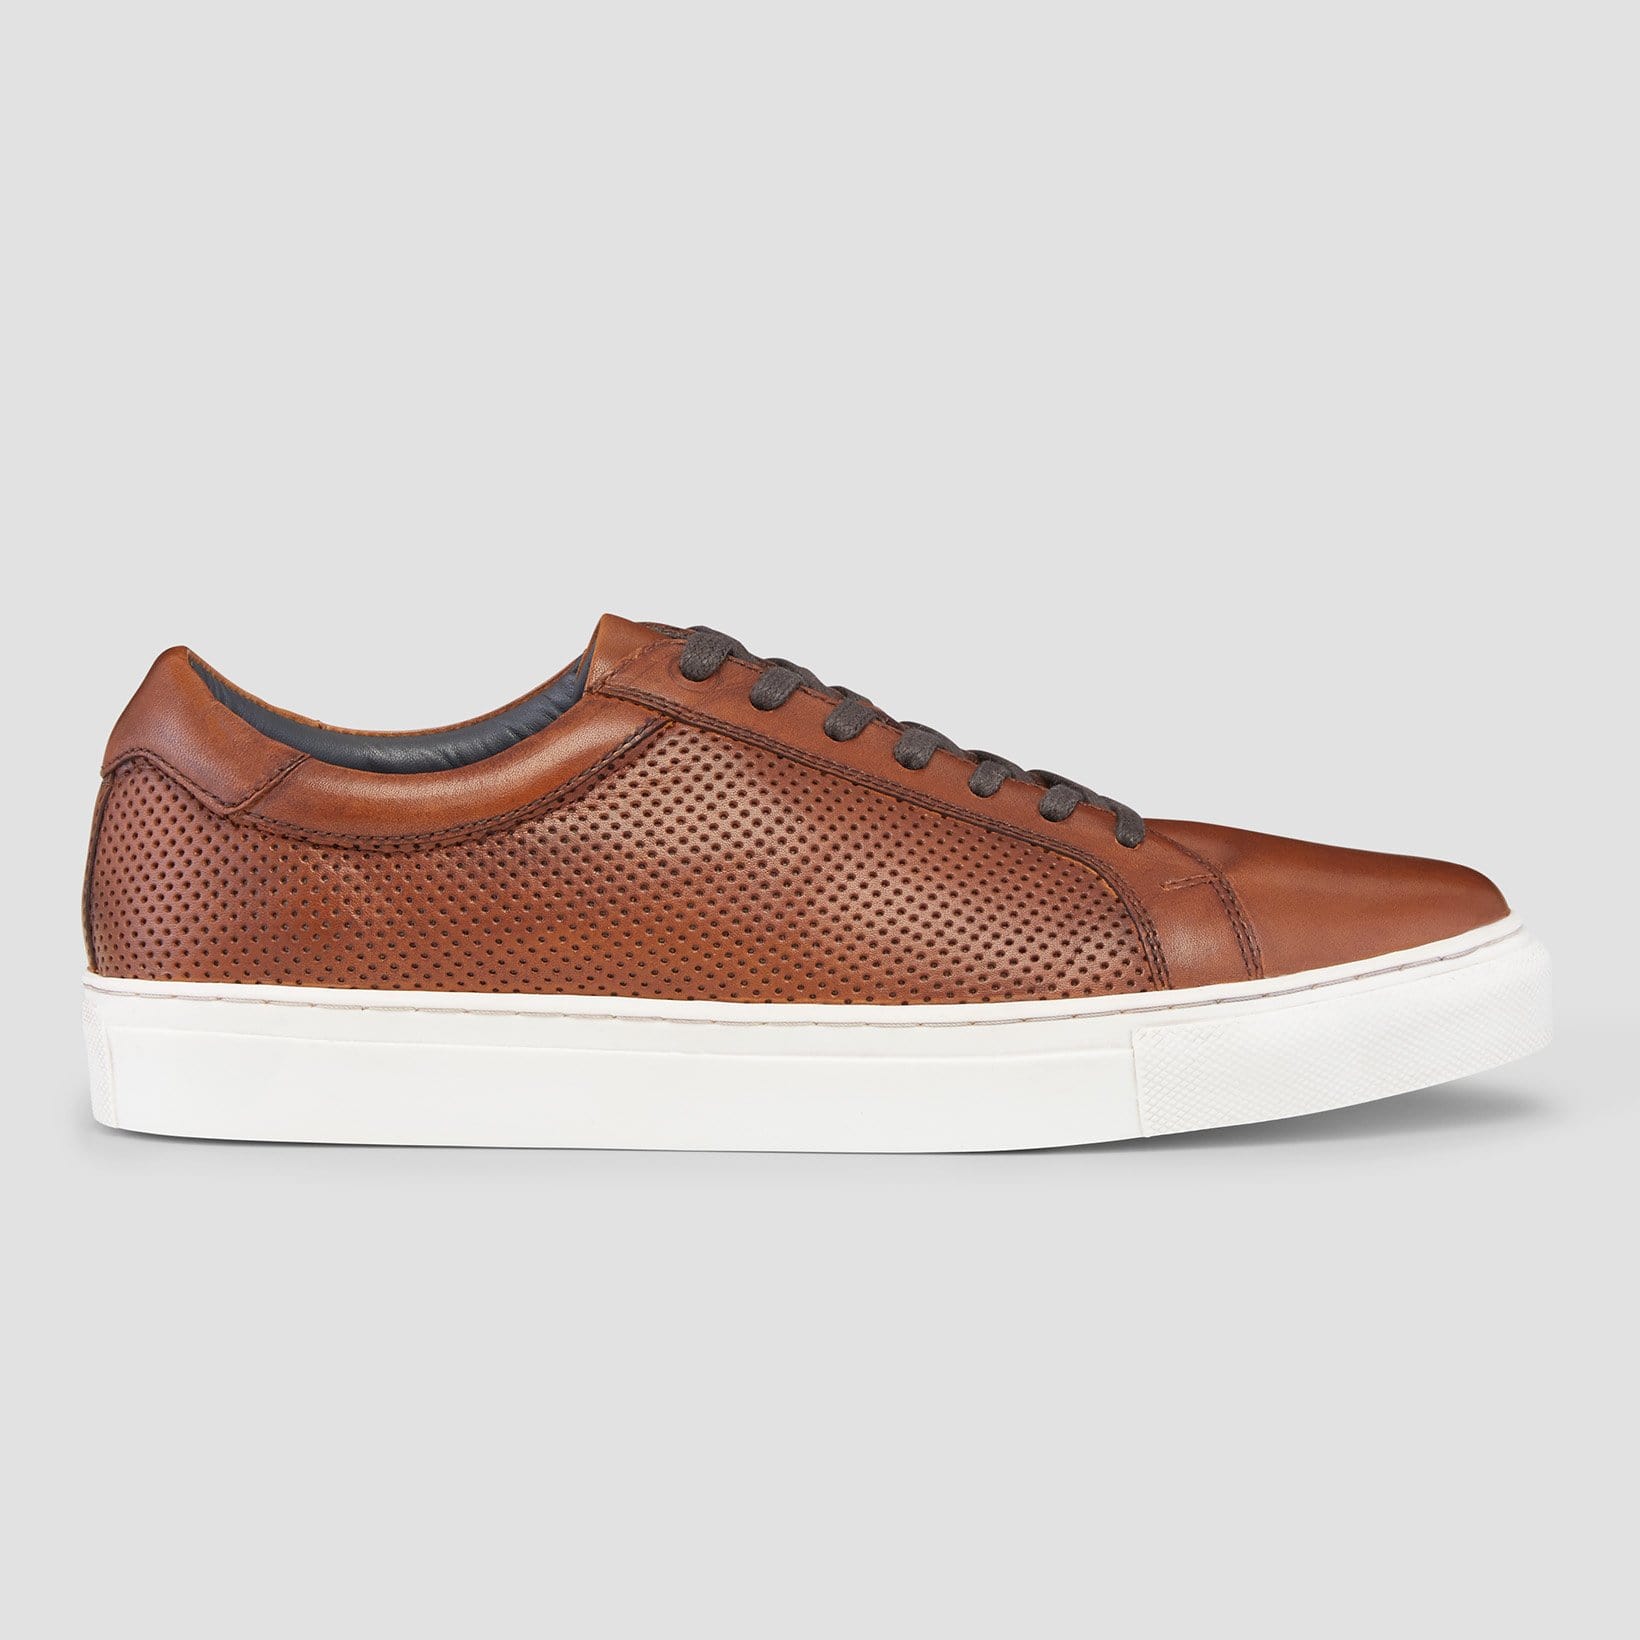 Mens Casual Shoes | AQ by Aquila smith mens sneaker in tan leather ...